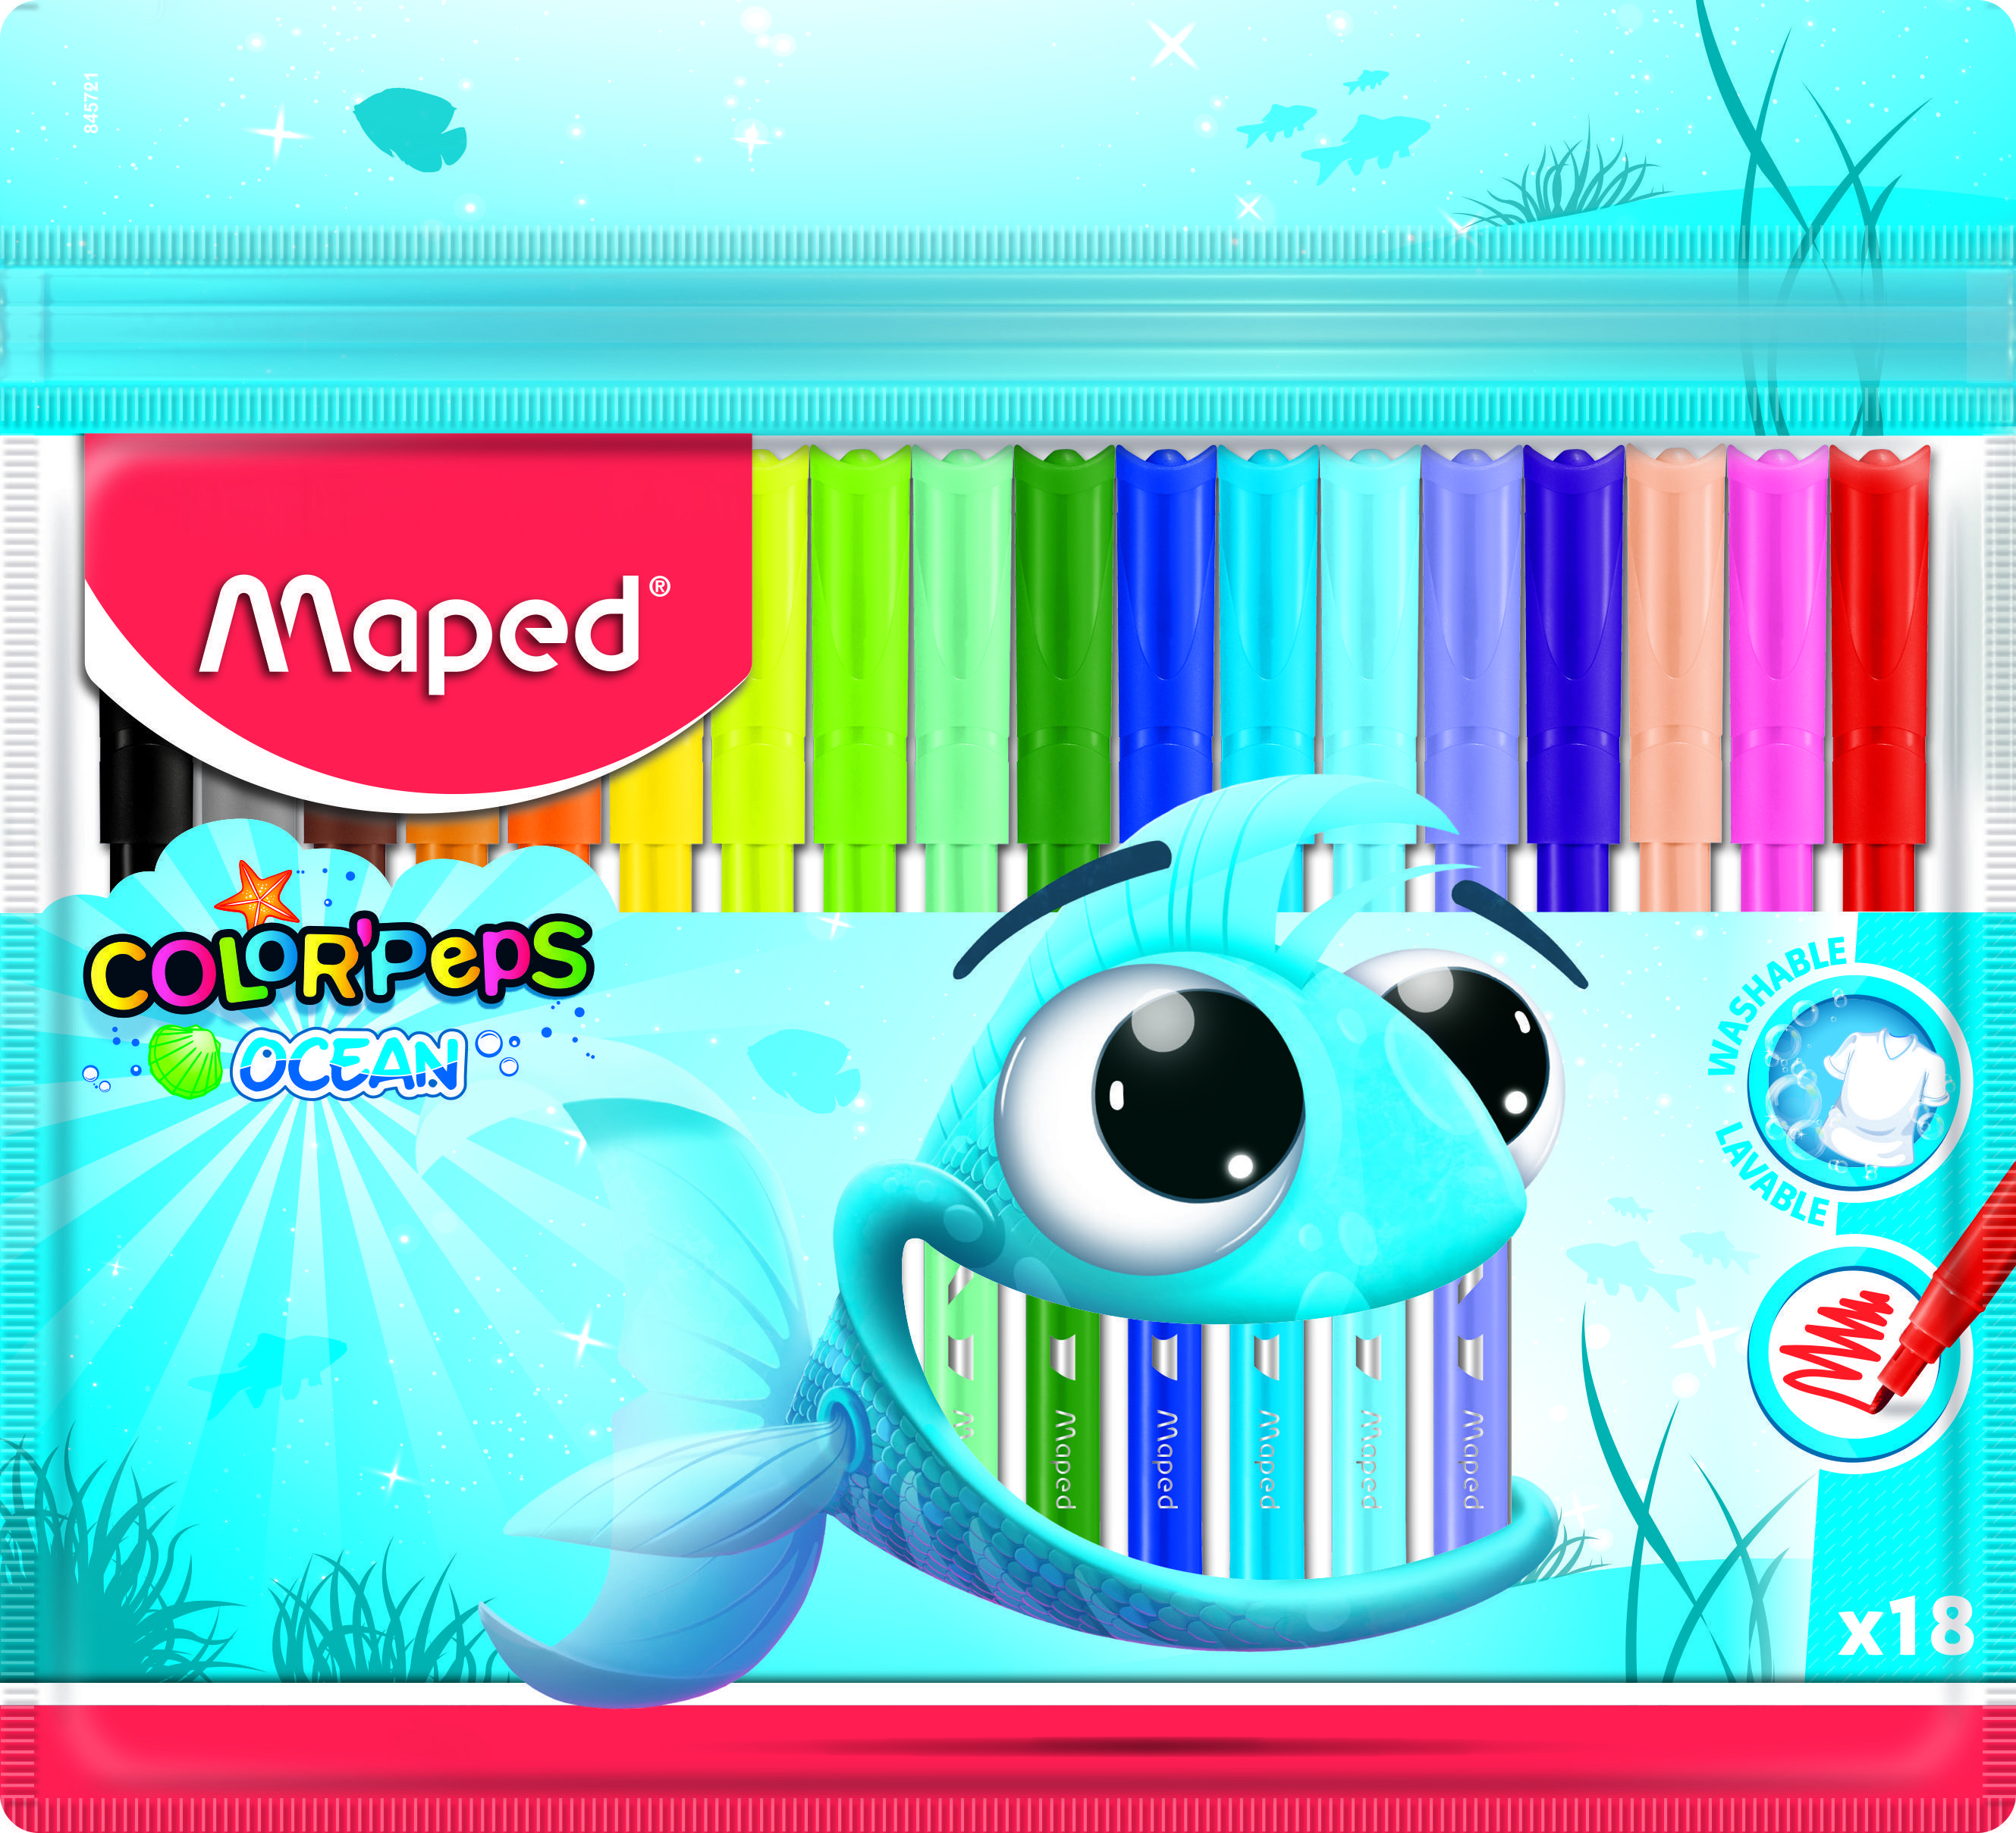  MAPED COLOR'PEPS OCEAN     -   ,    18  